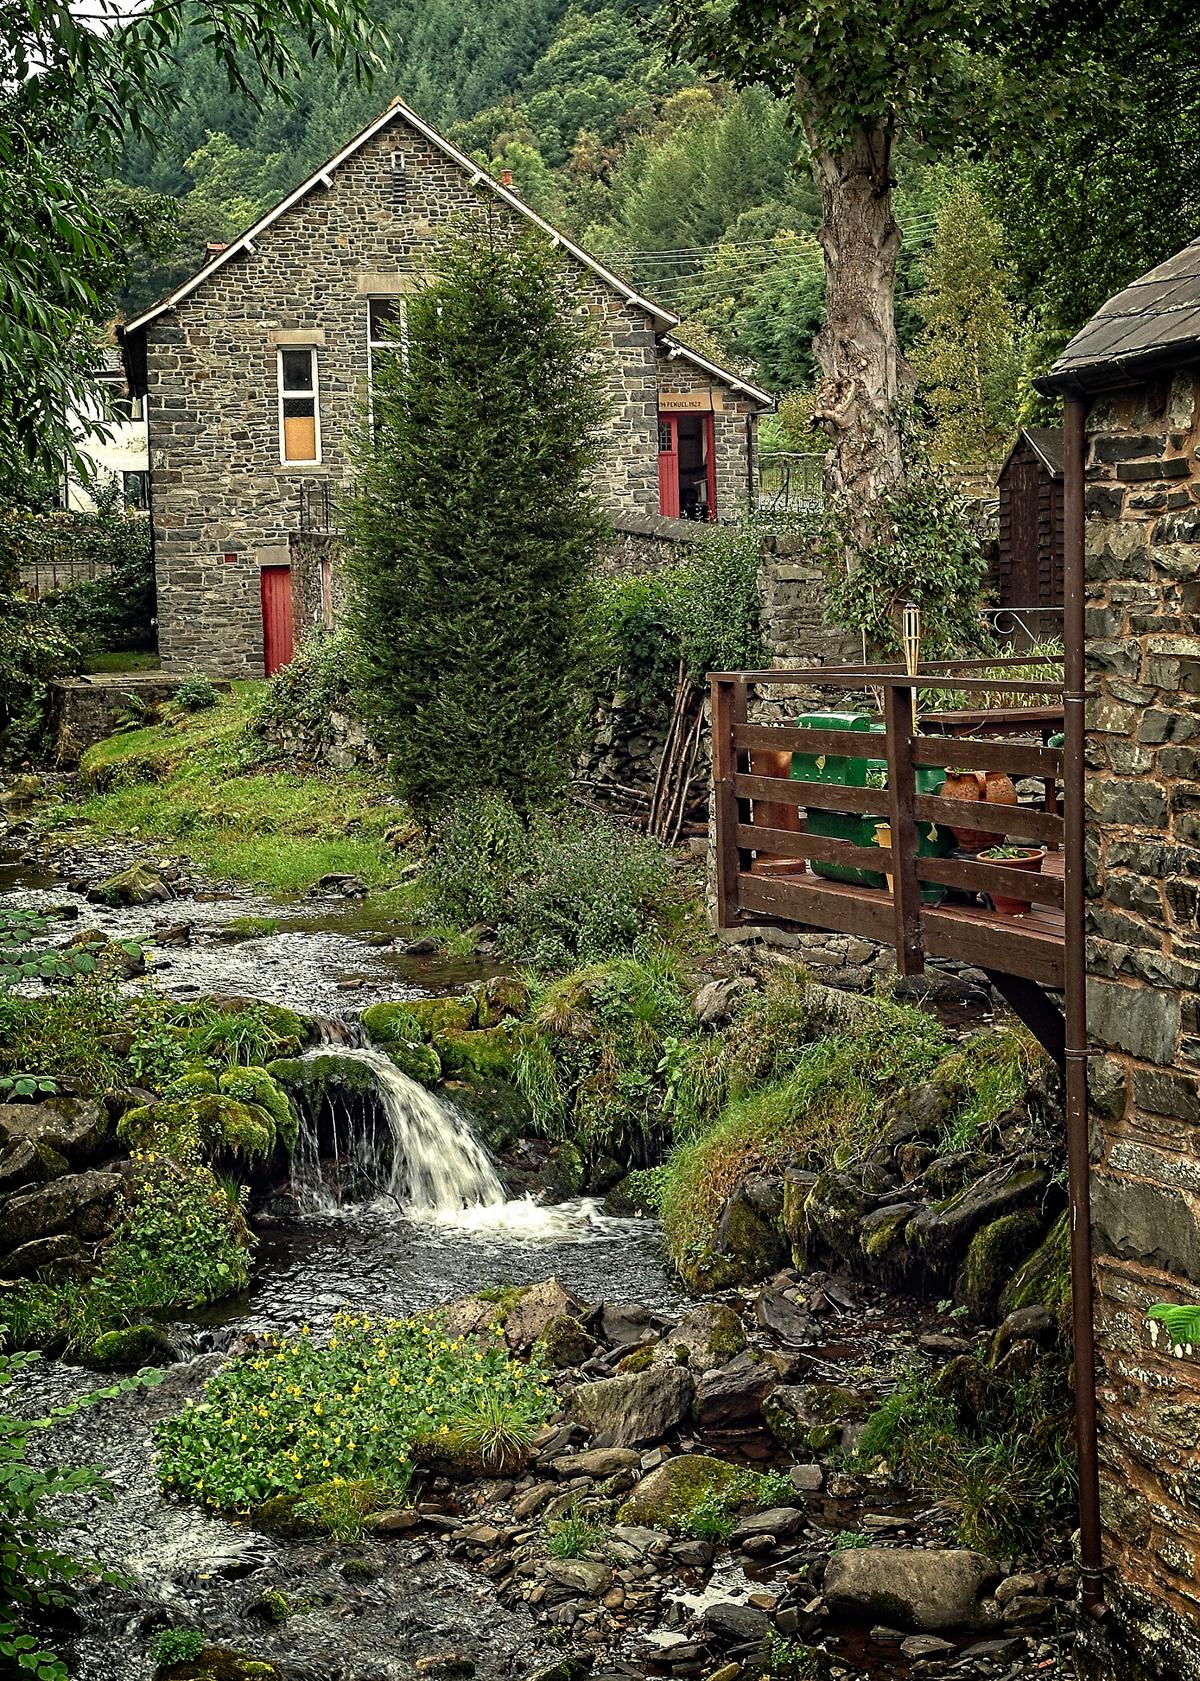 A stream running through a small village in the countryside of northern Wales. Hiking from village to village is a popular tourist activity in Wales. (Copyright Fred J. Eckert)